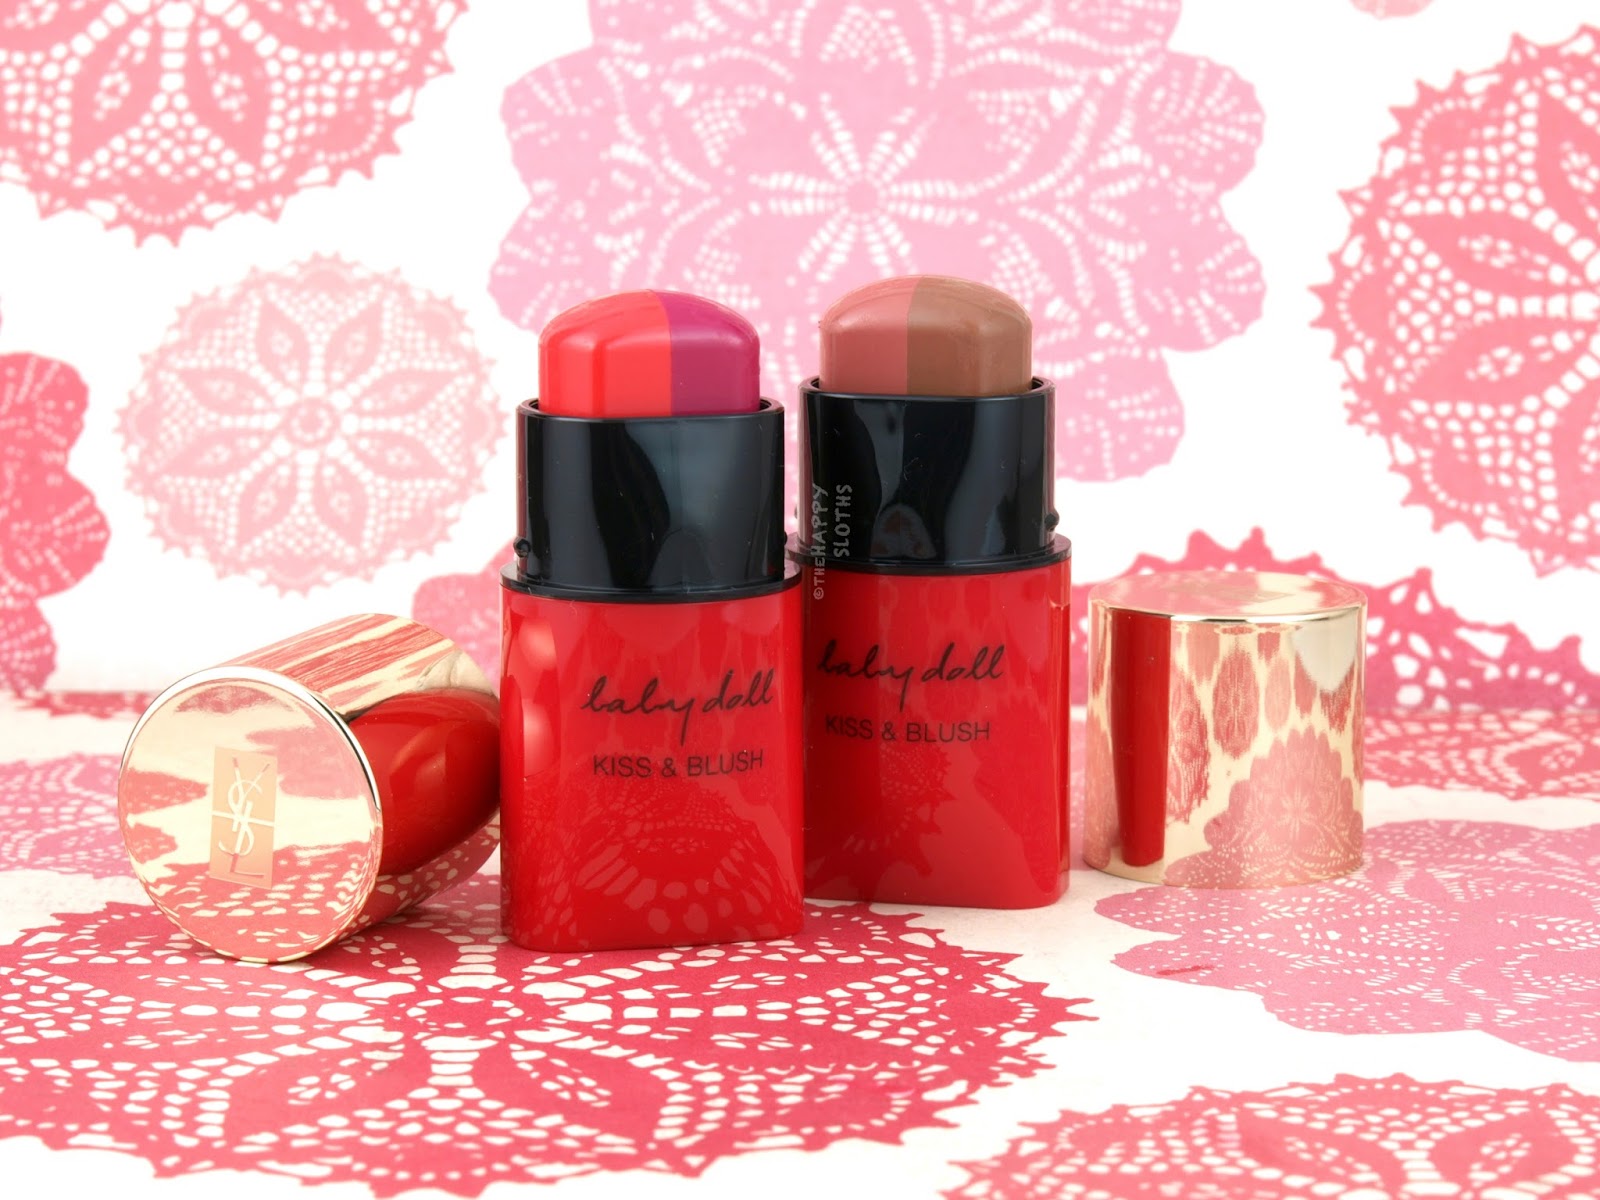 Yves Saint Laurent Baby Doll Kiss & Blush Duo Stick: Review and Swatches